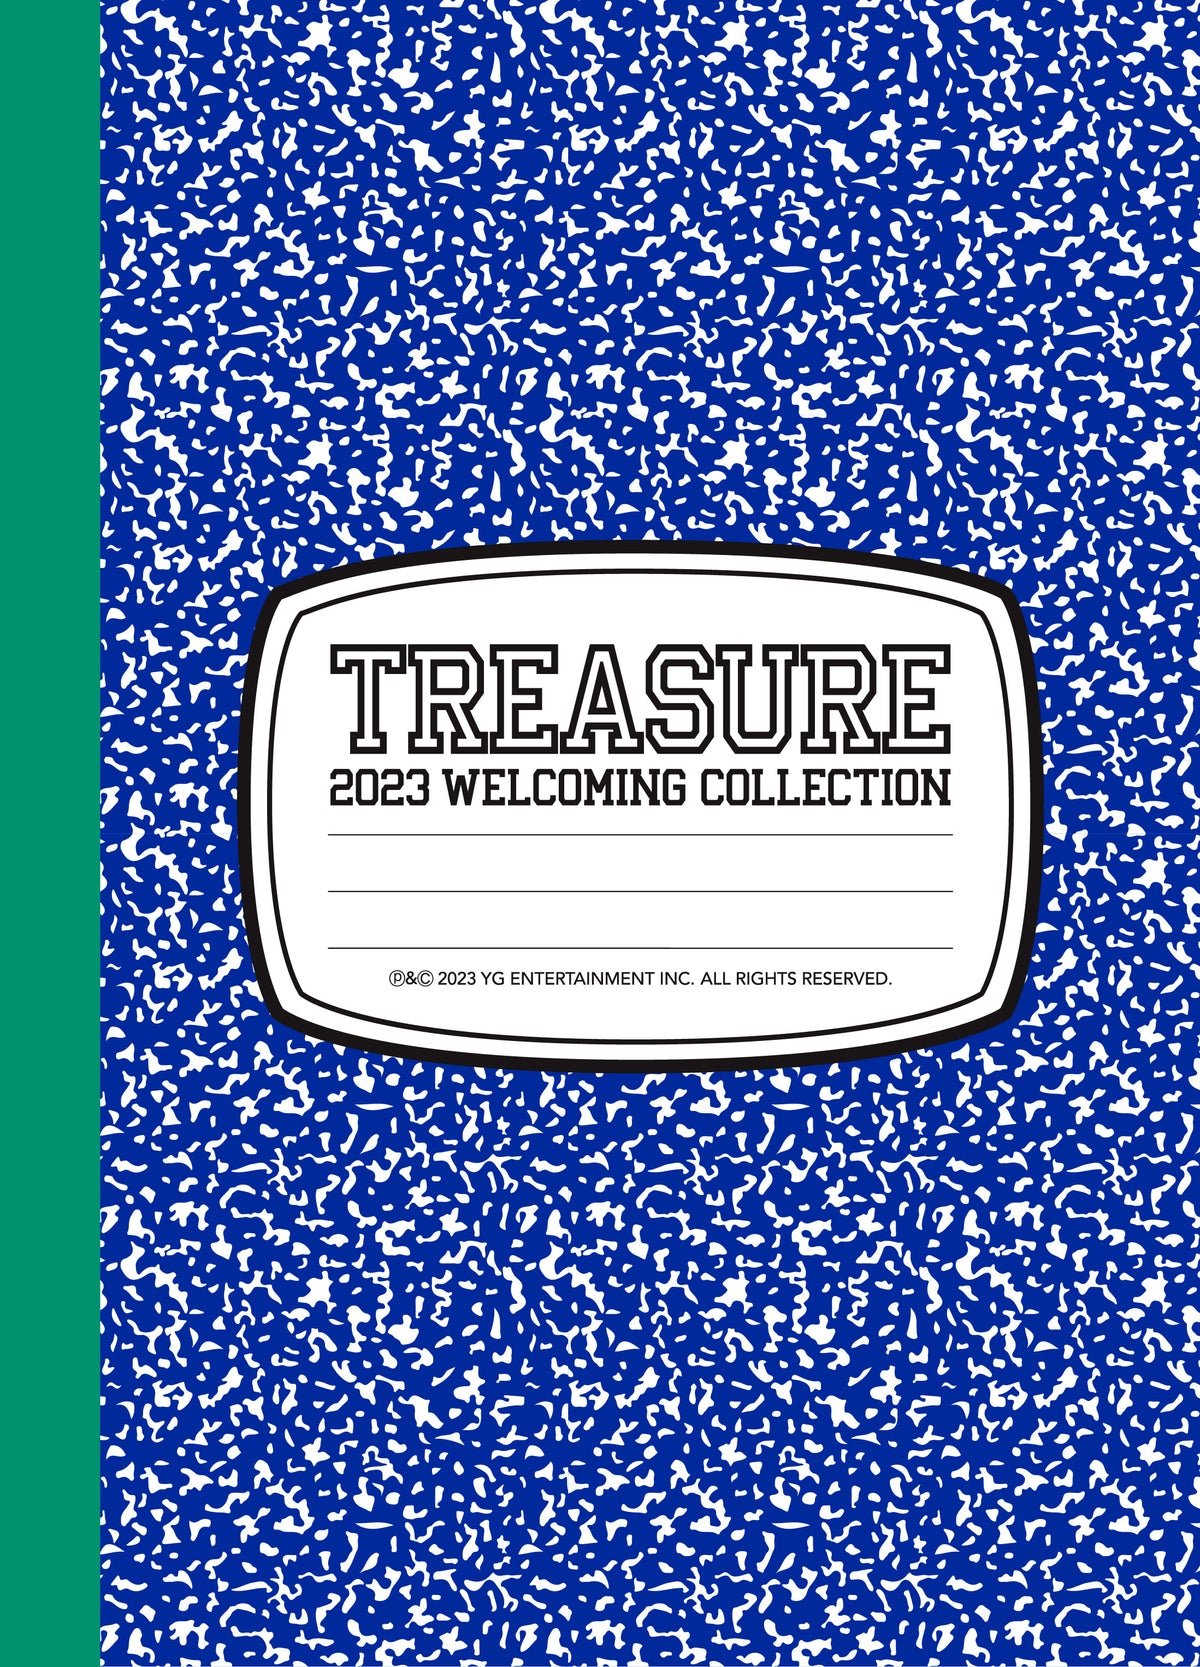 TREASURE - 2023 WELCOMING COLLECTION (KiT VIDEO)